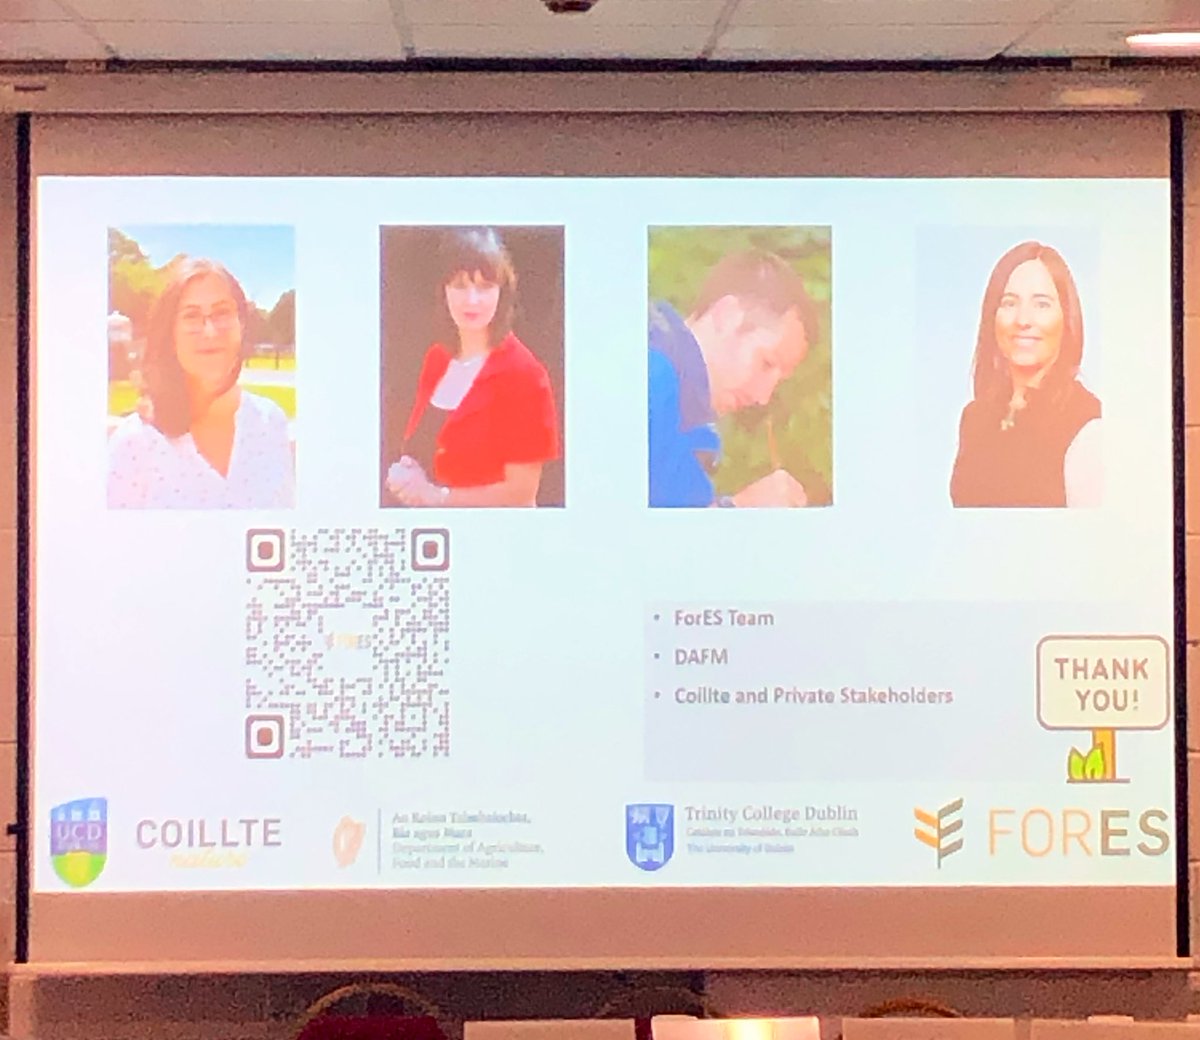 @IncaseProject @EPAResearchNews @seewilkie @stephenkinsella @EPAIreland @SEMRU_NUIG @IDEEAGroup @carl_obst @meeaus Next to speak at our #BiodiversityWeek event was @ConroyKathleen1 on how #NaturalCapital accounts are being created by @ForESproject team from @tcddublin & @ucddublin in collaboration with @coilltenews and Dept of @agriculture_ie to enable sustainable decision-making #ForNature